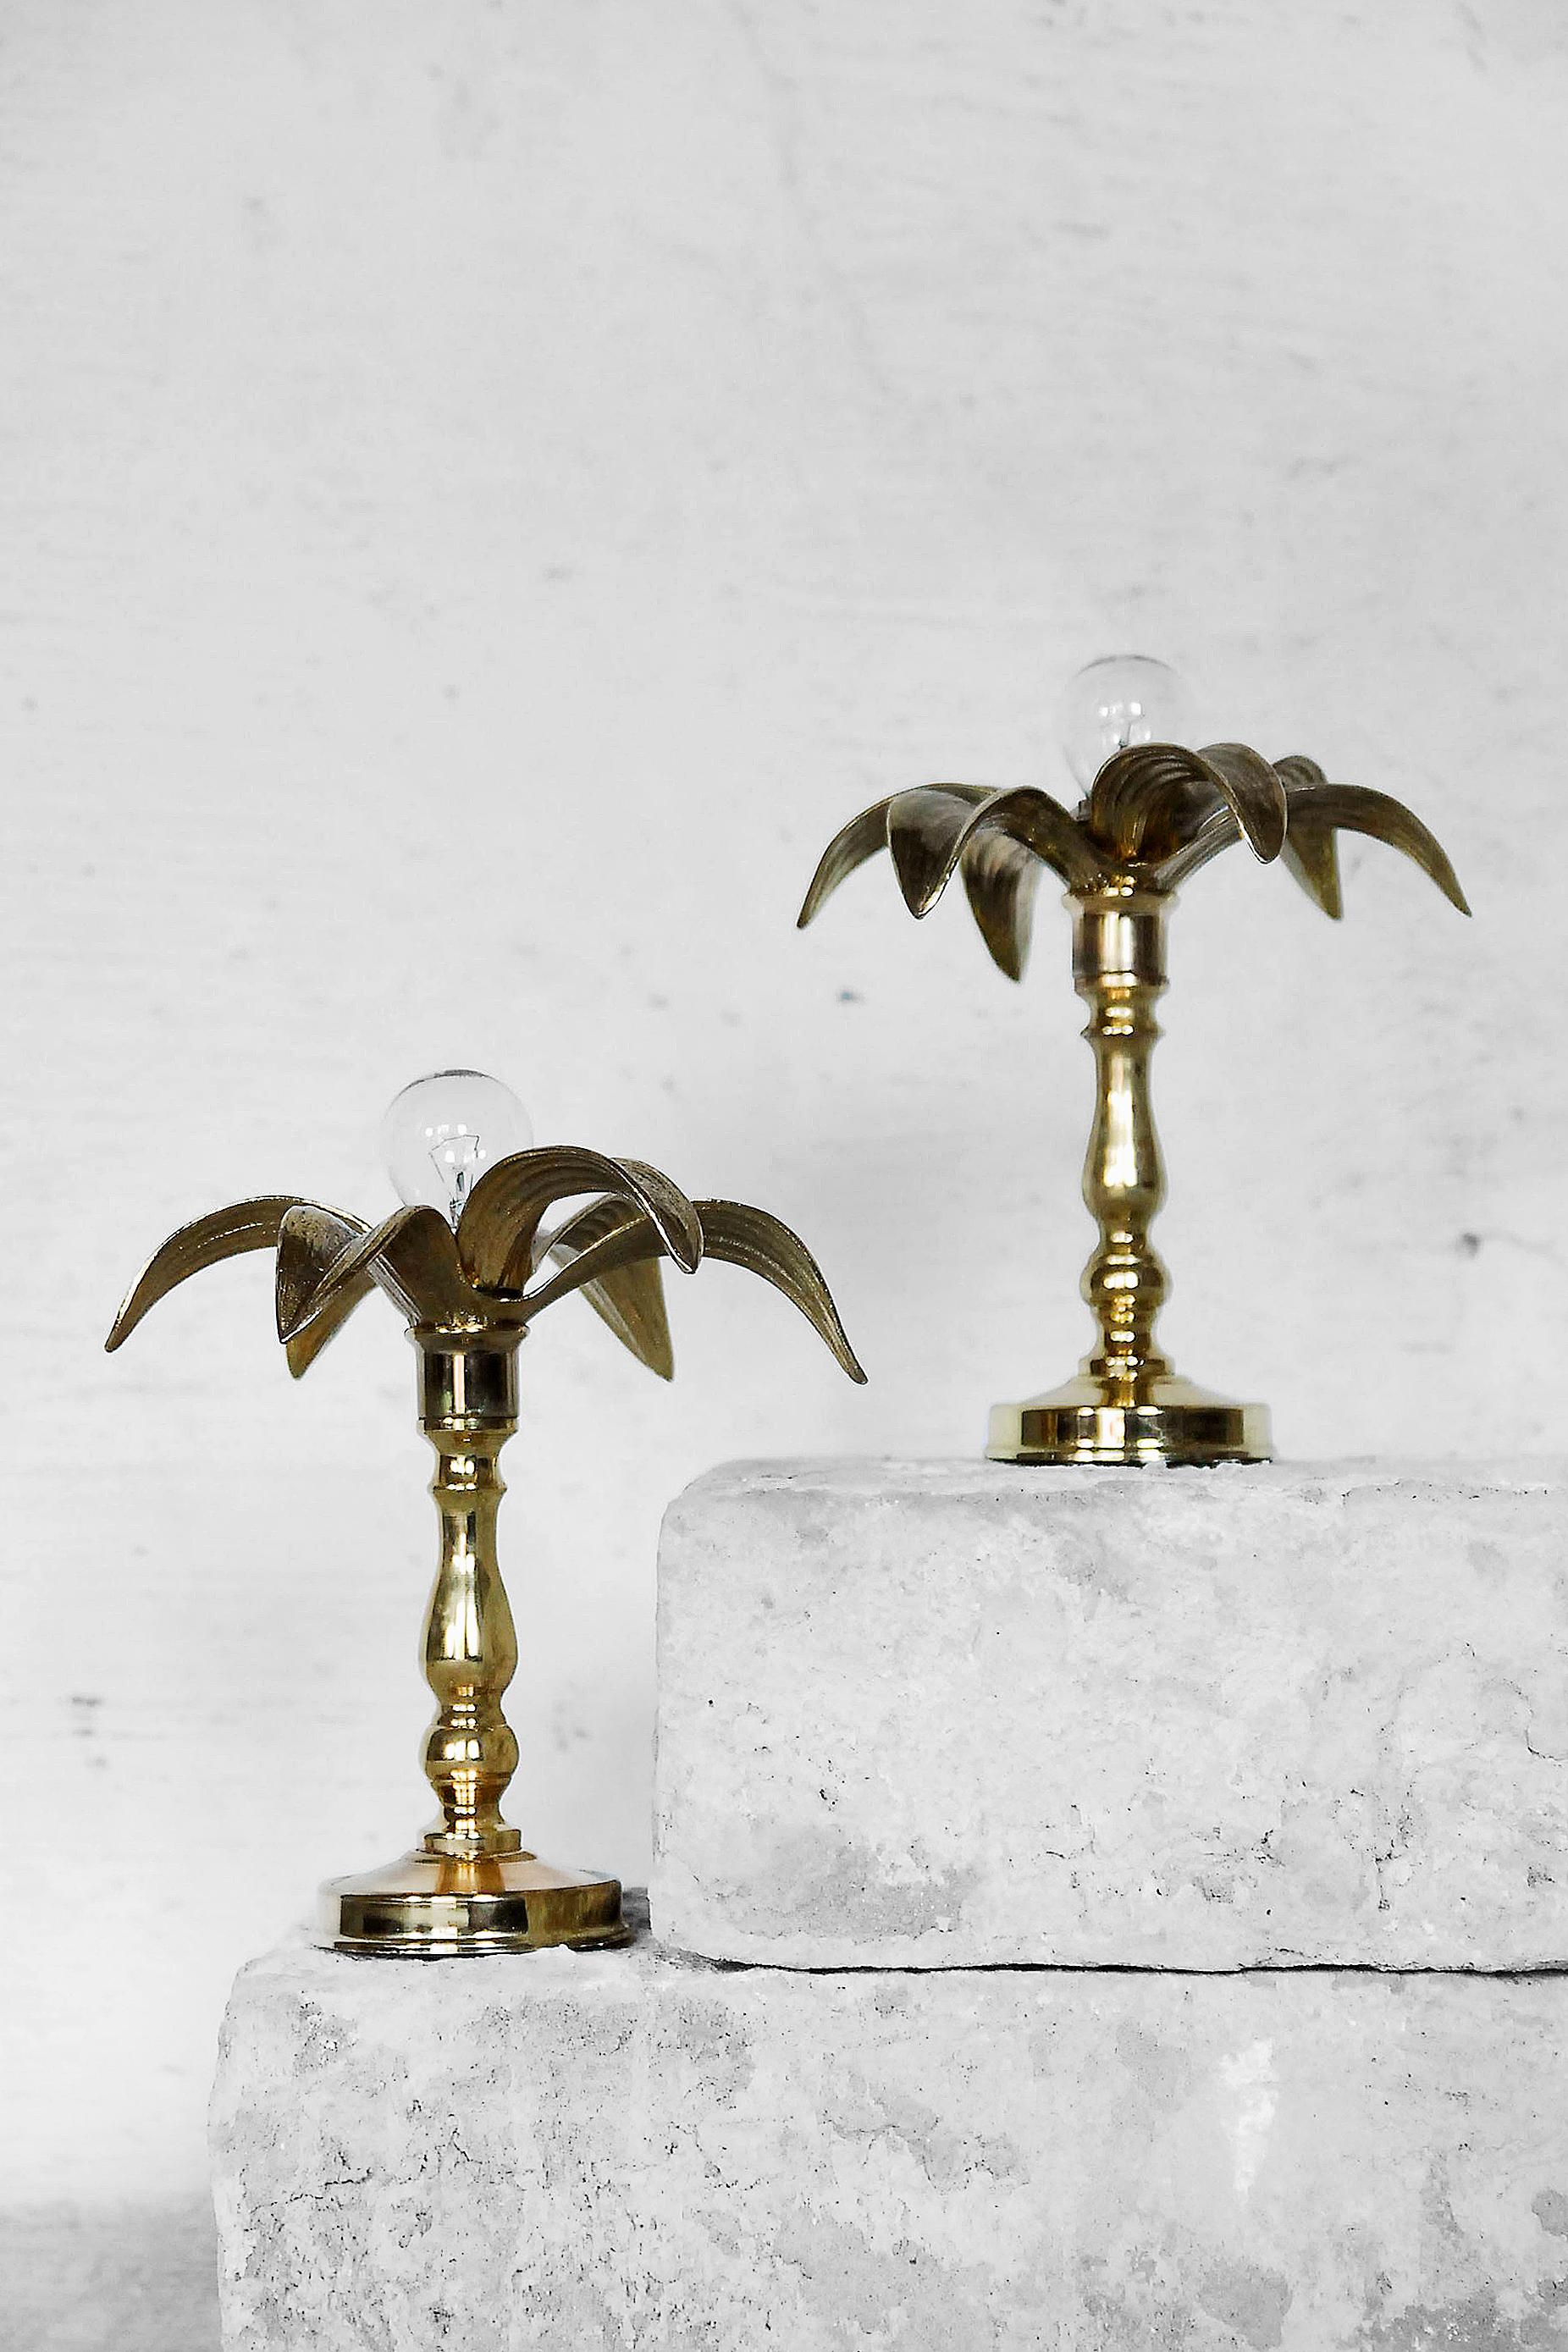 These table lamps were manufactured in Belgium by Massive during the 1970s. They were designed in a Hollywood Regency style and draw heavily on Willy Daro designs. These lights have the aesthetic of life-size flowers, sculpted in warm gold brass,